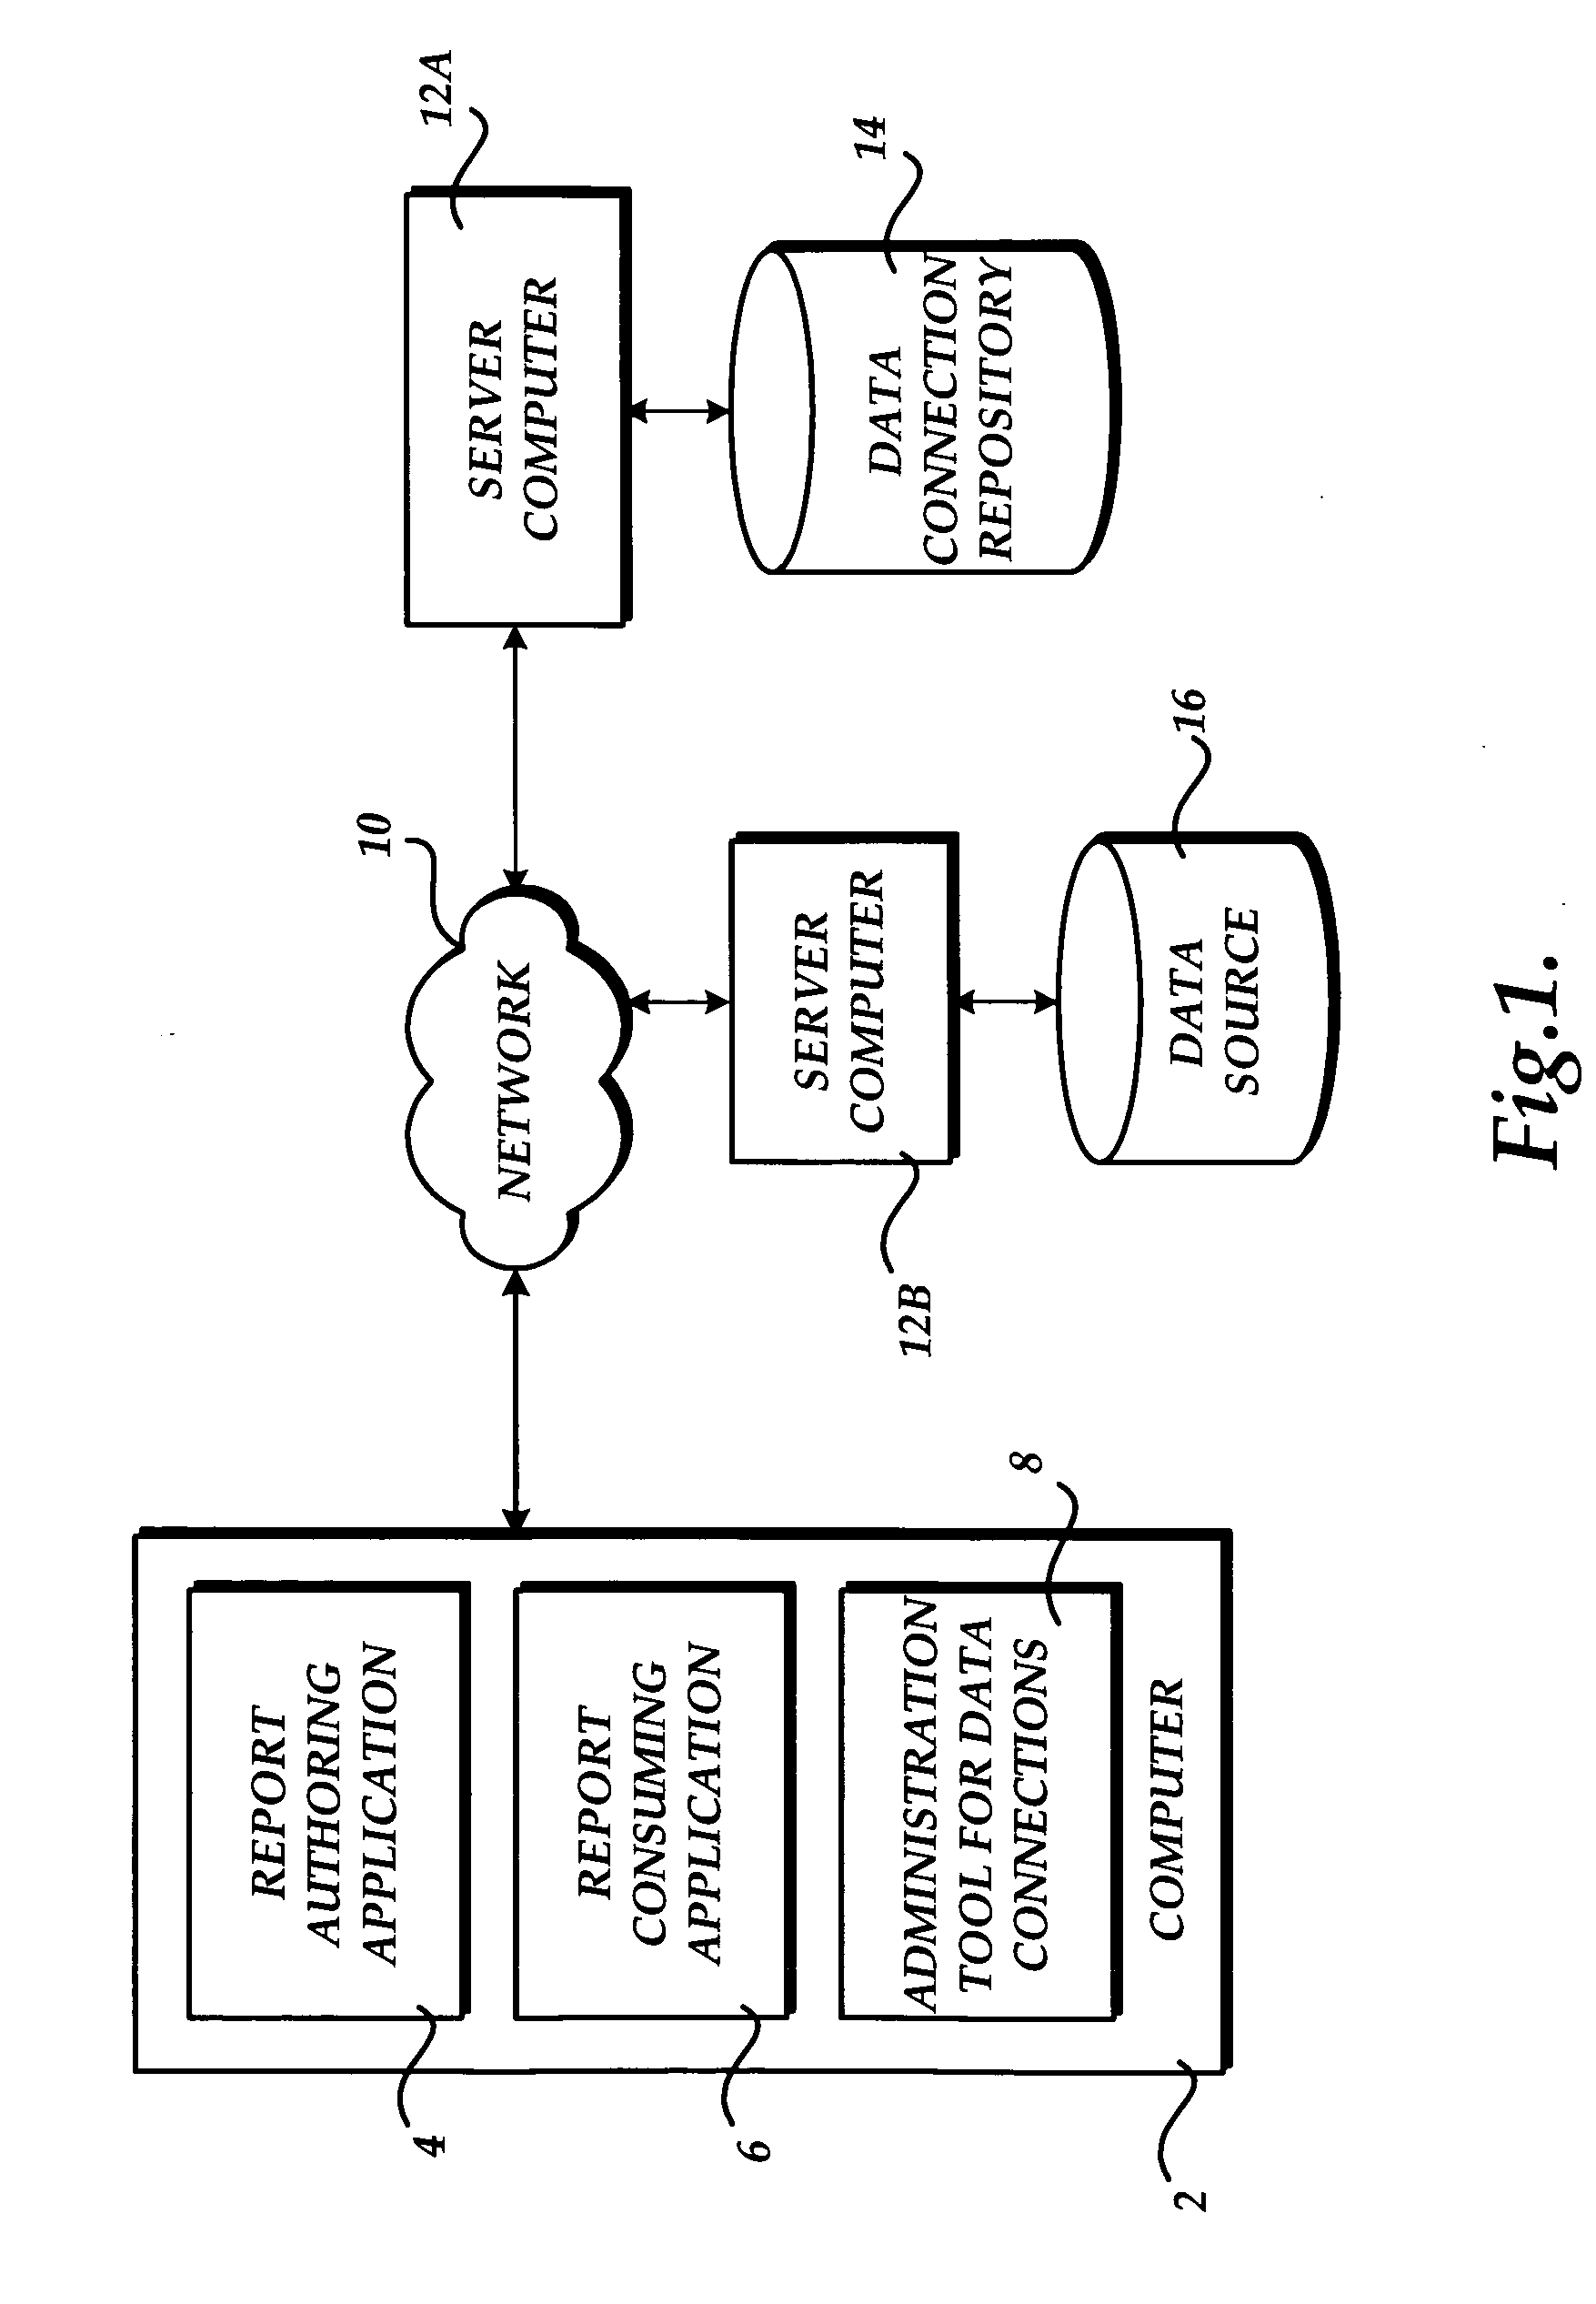 Method, system, and apparatus for discovering and connecting to data sources